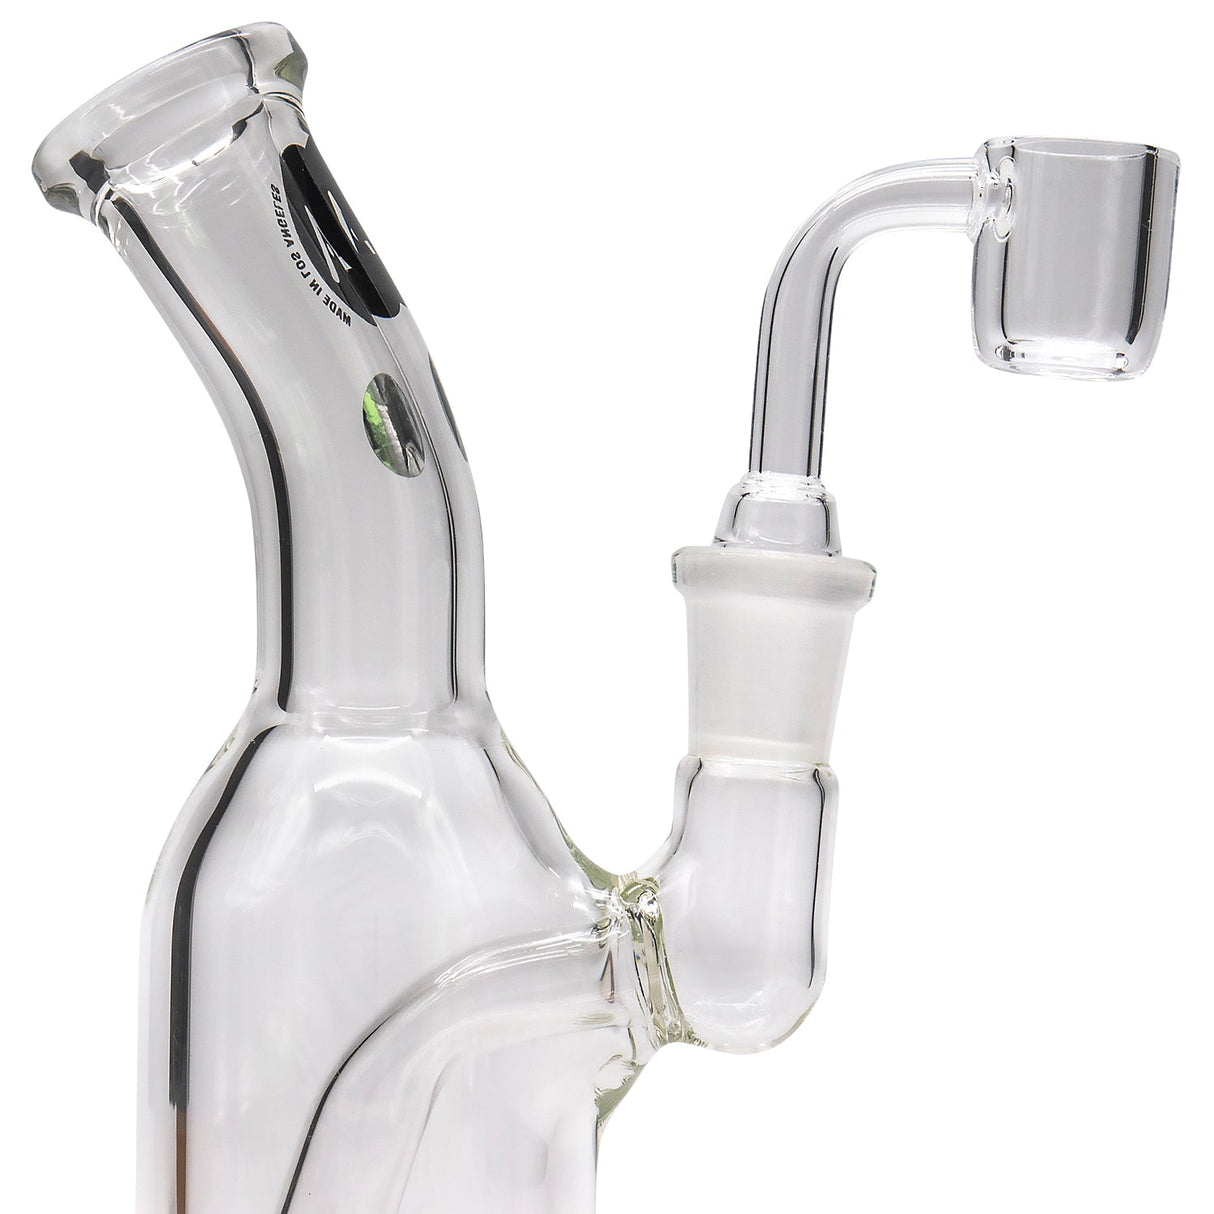 LA Pipes Bent Neck Concentrate Waterpipe with Quartz Banger, Side View on White Background